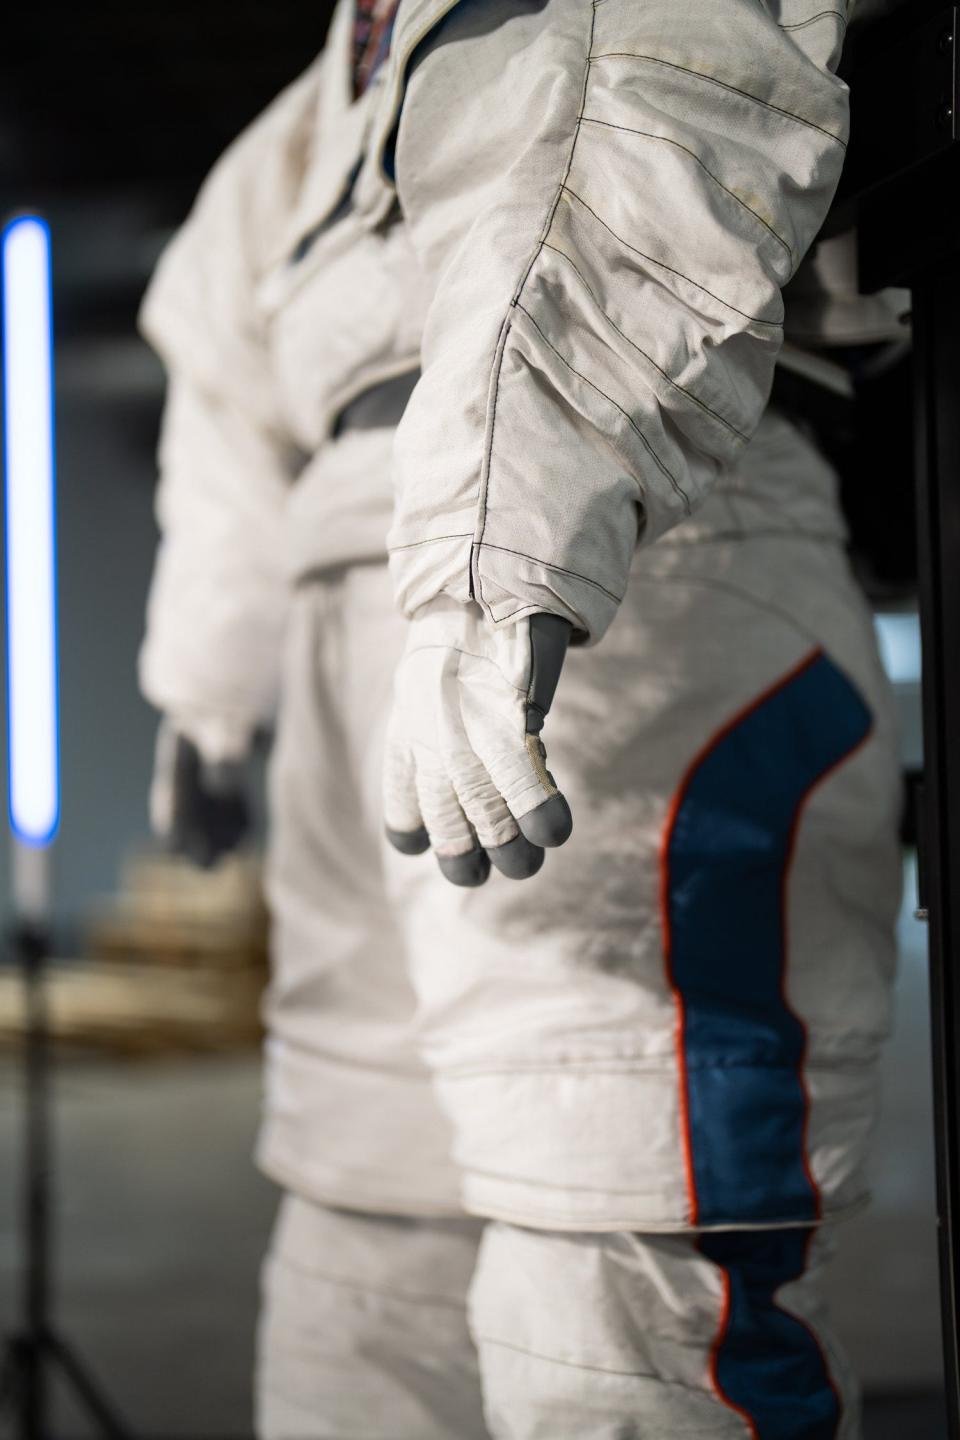 Pictured is the white cover layer of Axiom Space’s Extravehicular Mobility Unit spacesuit prototype. Prada’s engineers will work alongside the Axiom Space systems team to develop space suits to protect astronauts on the Artemis III mission to the lunar surface.